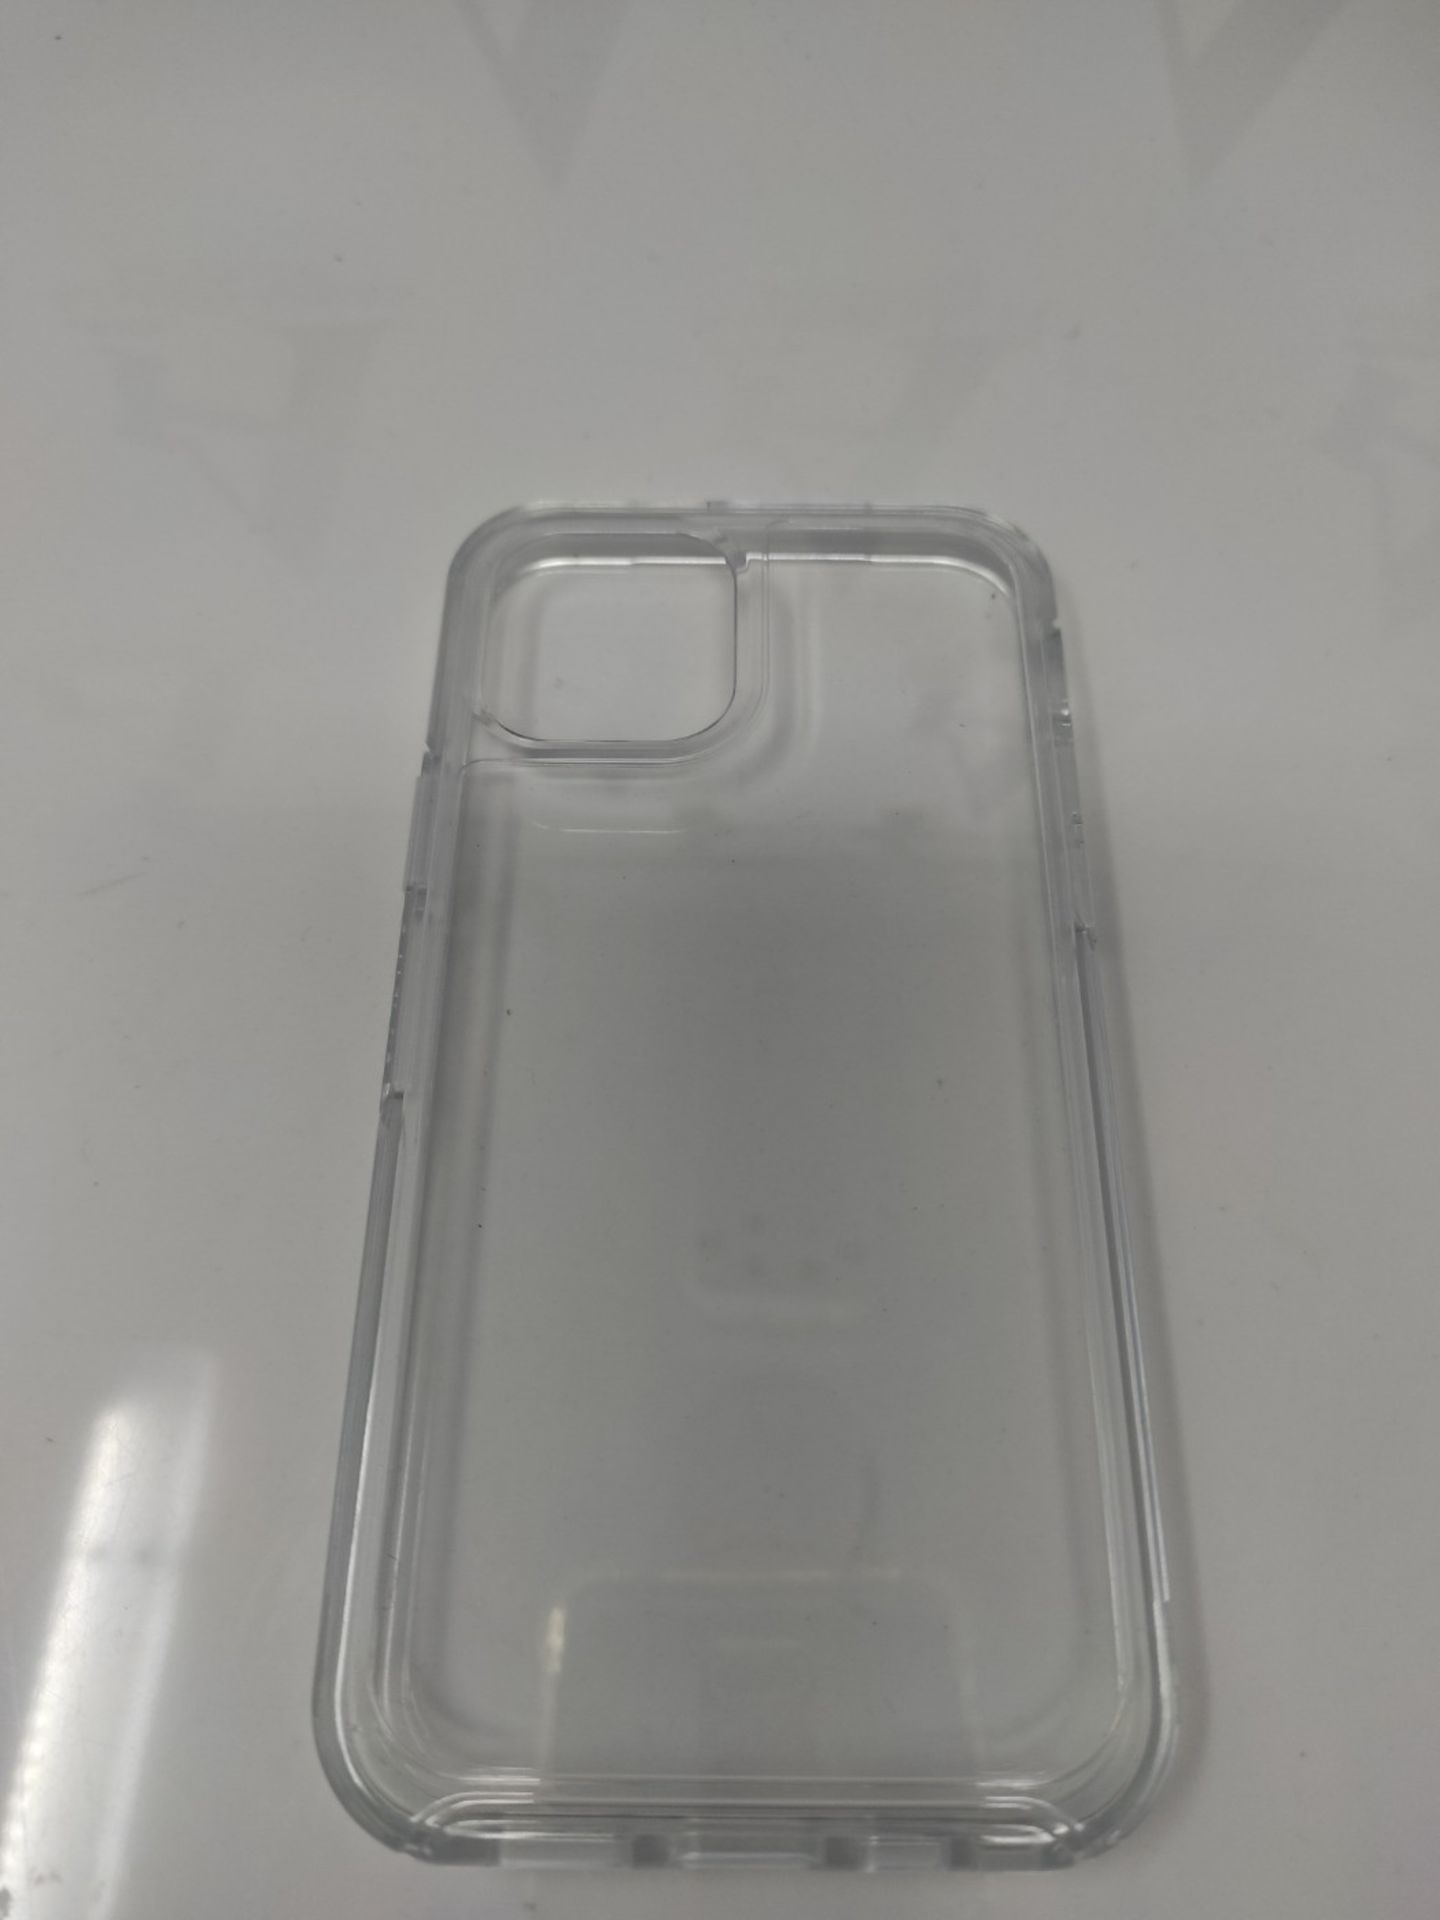 OtterBox Symmetry Clear Case for iPhone 12 / iPhone 12 Pro, Shockproof, Drop Proof, Pr - Image 2 of 2